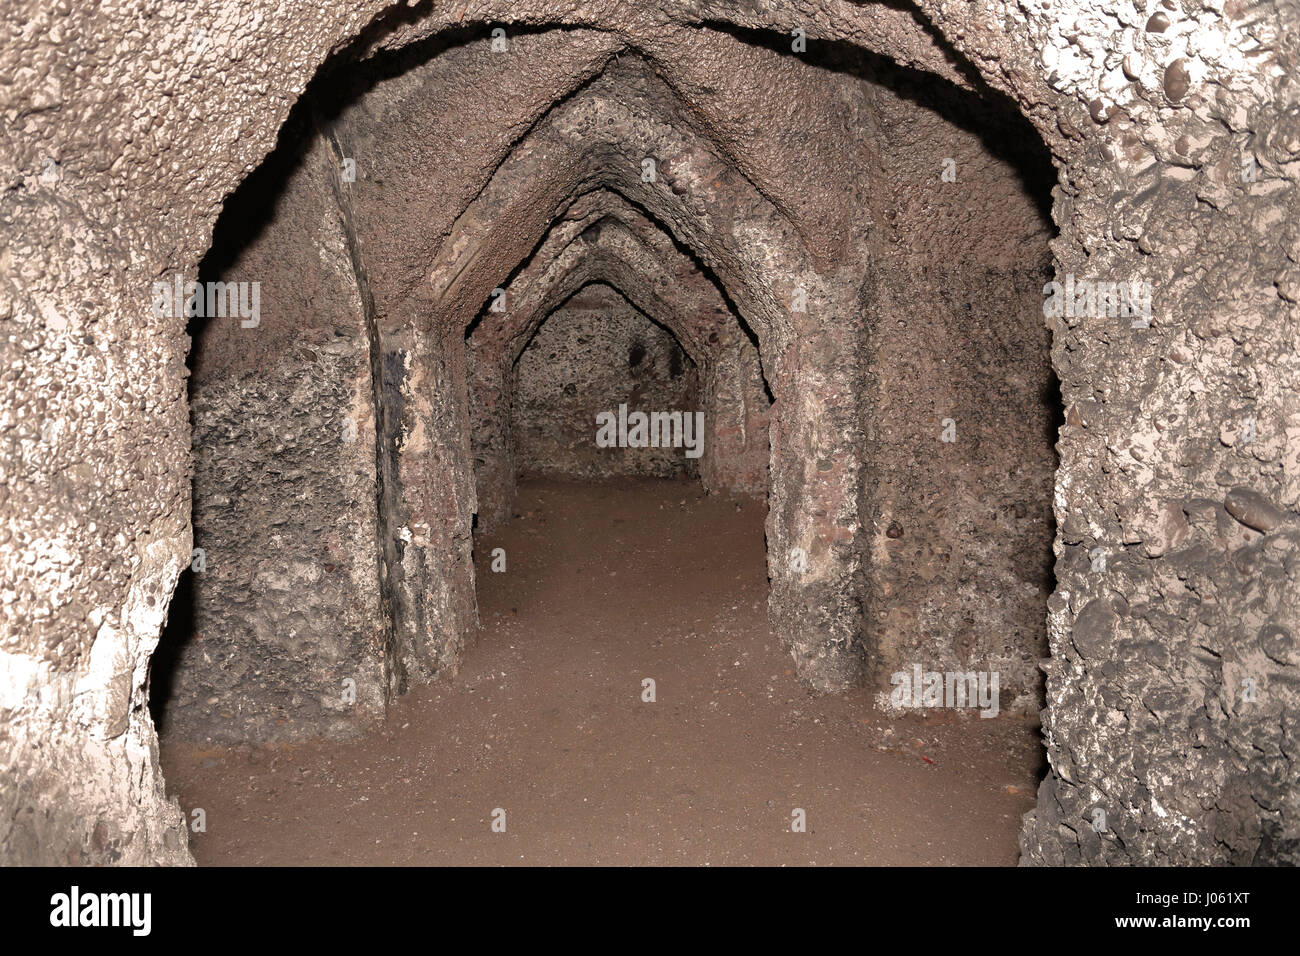 UNITED KINGDOM: EERIE images reveal the remains of a hidden 18th century underground pagan temple that might have been used for occult rituals and has been sealed and left to crumble away. The haunting shots show a series of underground passages, structural columns adorned with graffiti and rubble that has crumbled from the temple’s roof. Other atmospheric shots, from this location near Hagley in Worcestershire, show a roman style altar. The stunning photographs were taken by sales advisor, Jason Kirkham (44). To take his pictures, Jason used a Canon 5D Mark 3 camera. Jason Kirkham / mediadrum Stock Photo